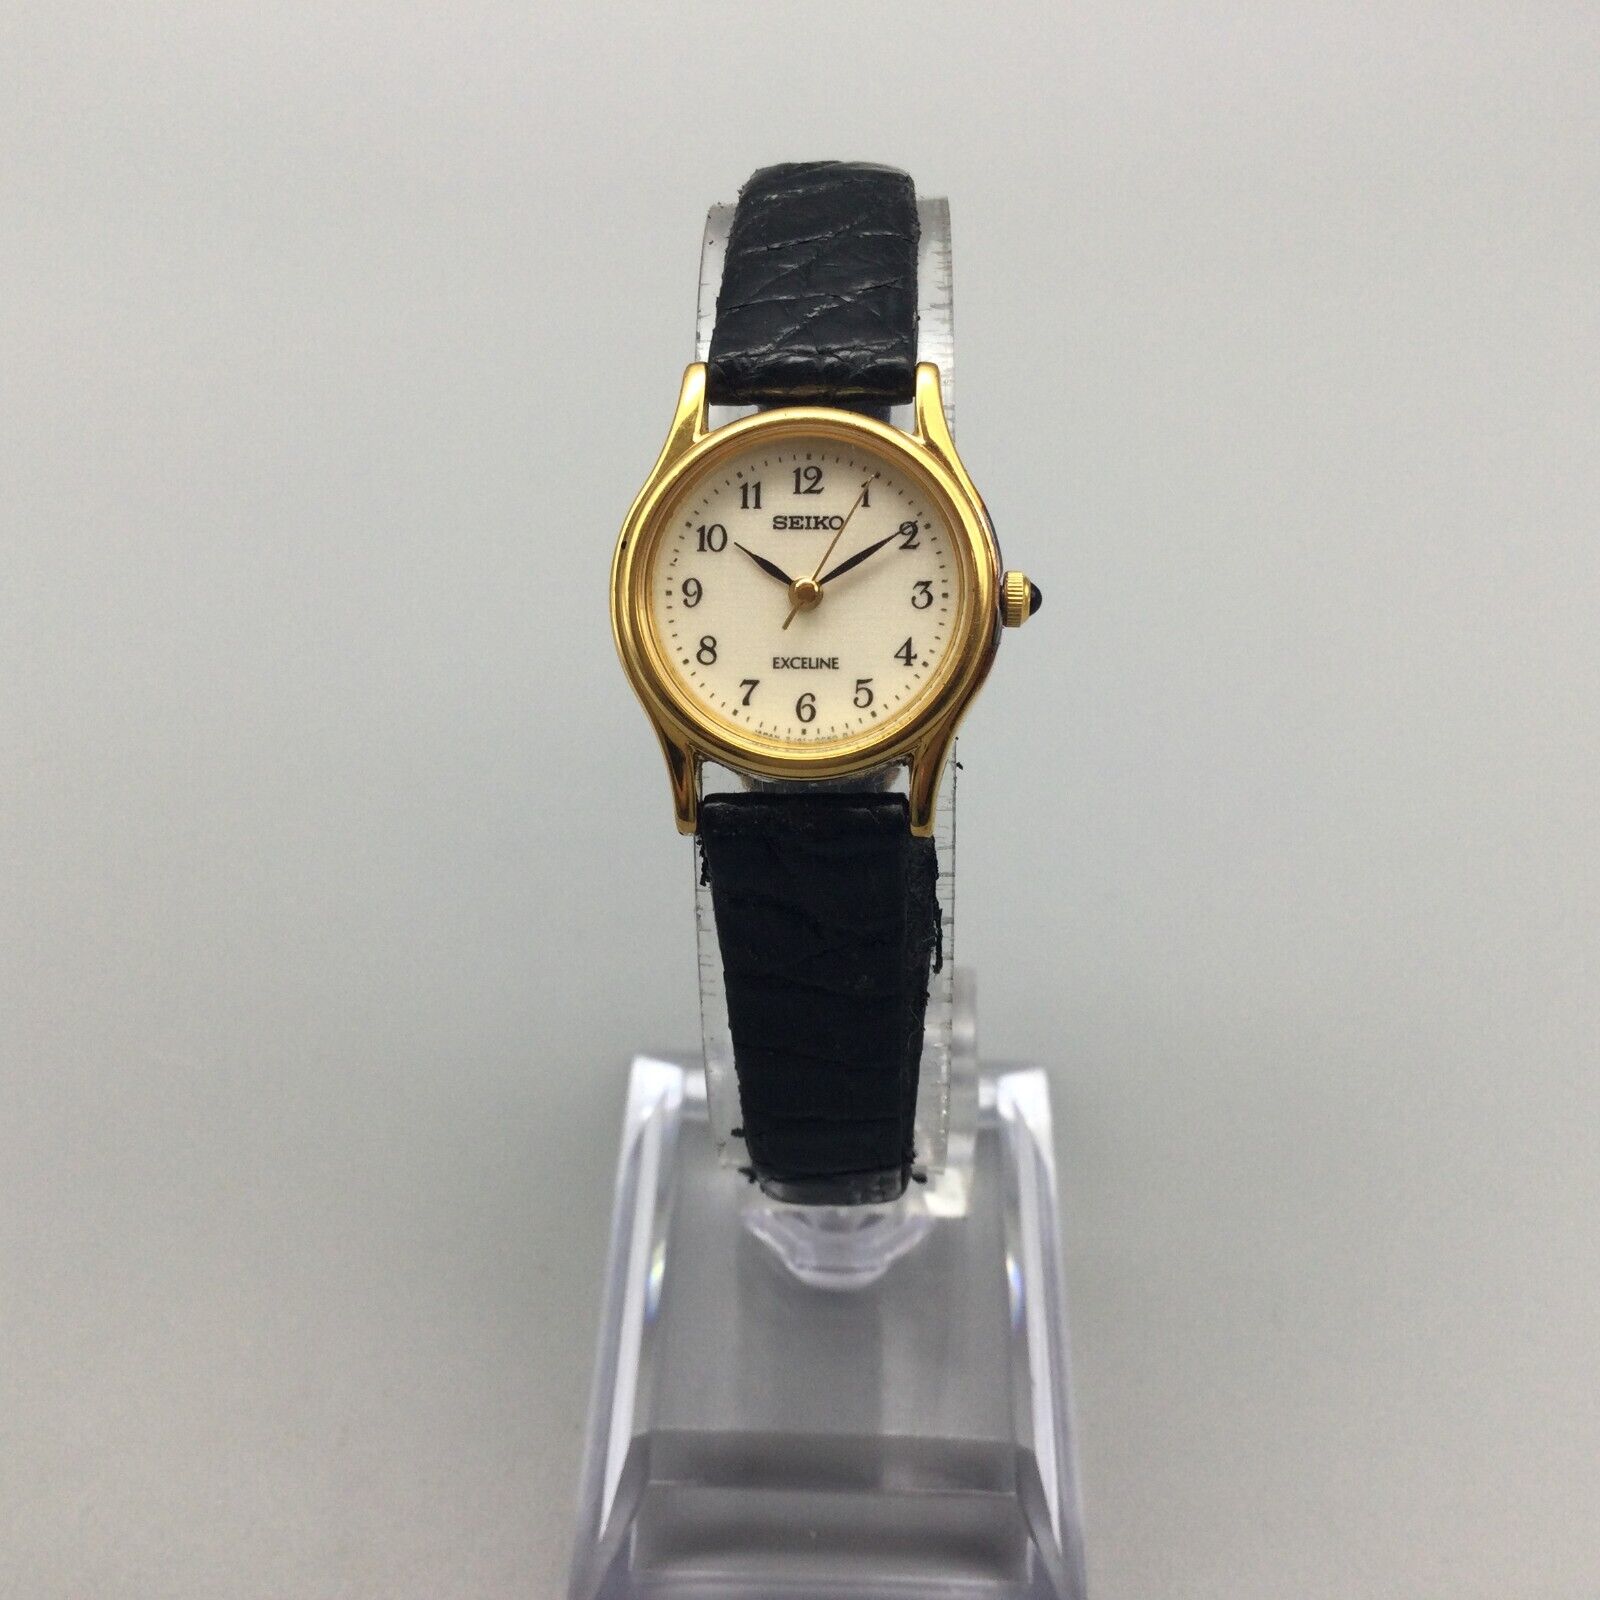 Seiko Exceline Watch Women Gold Plated Round Dial 2J41-0040 New 